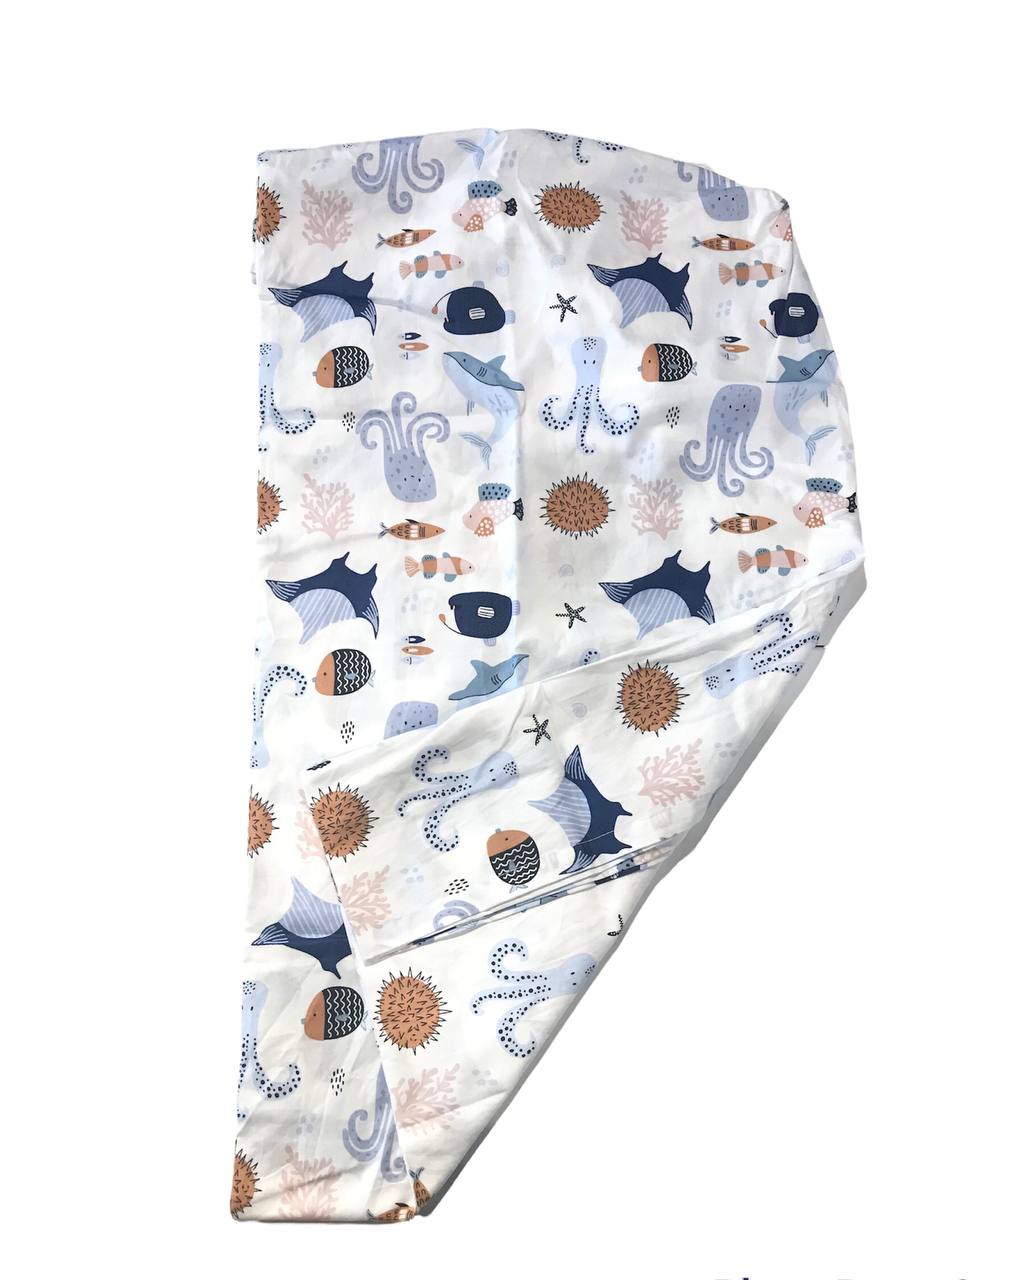 Crib Fitted Sheet (28x52) - Under The Sea